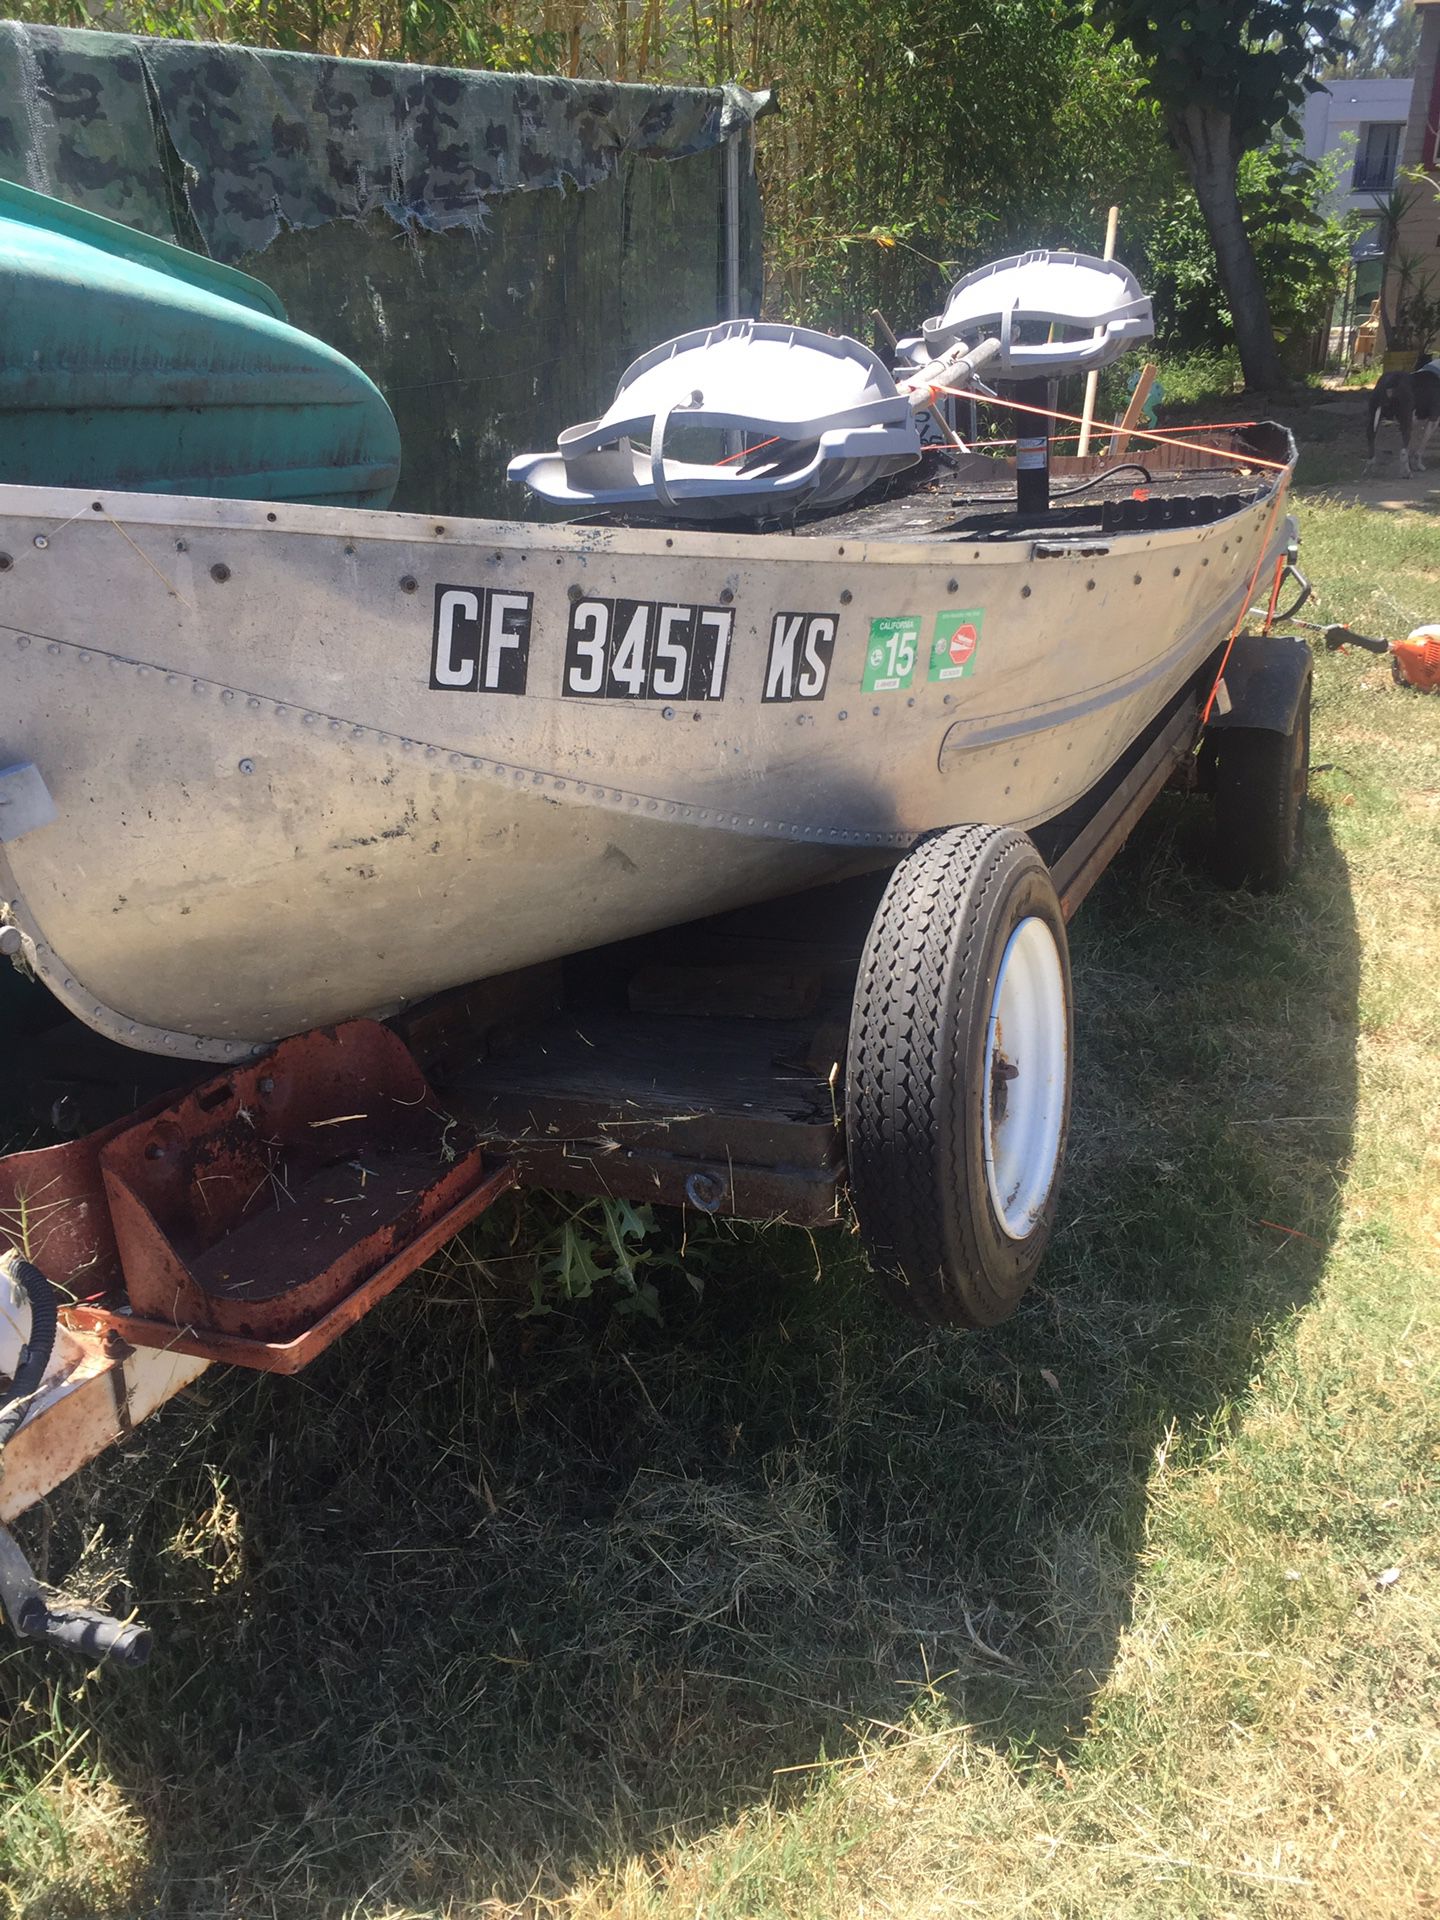 12 foot aluminum seeking lake boat with trailer for sale